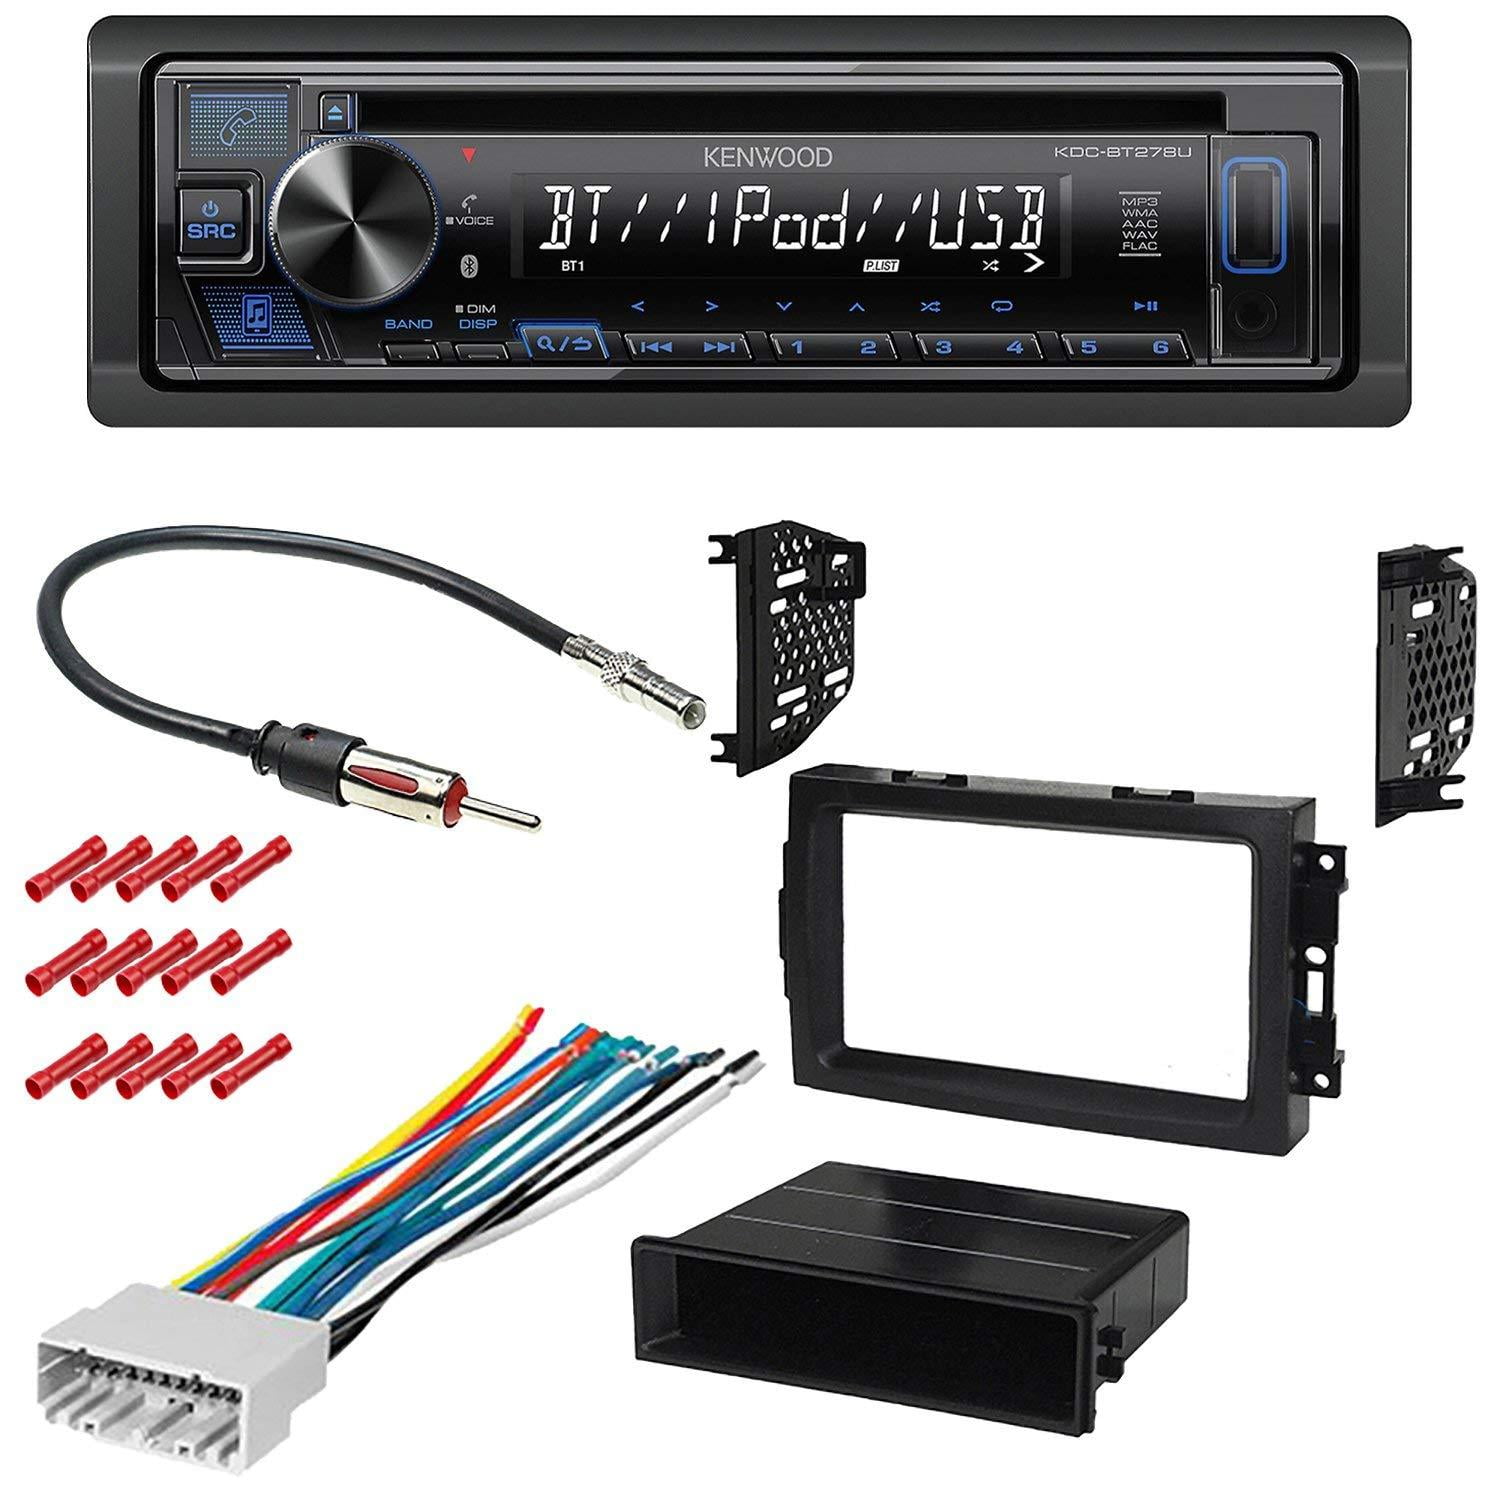 Krijt Thriller Concentratie KIT8110 Kenwood Car Stereo with Bluetooth for 2007-2008 Dodge Caliber w/  Single DIN Car Stereo Installation Kit CD/AM/FM Receiver USB Aux, Dual  Phone Connection, Pandora/Spotify/iHeartRadio Control - Walmart.com